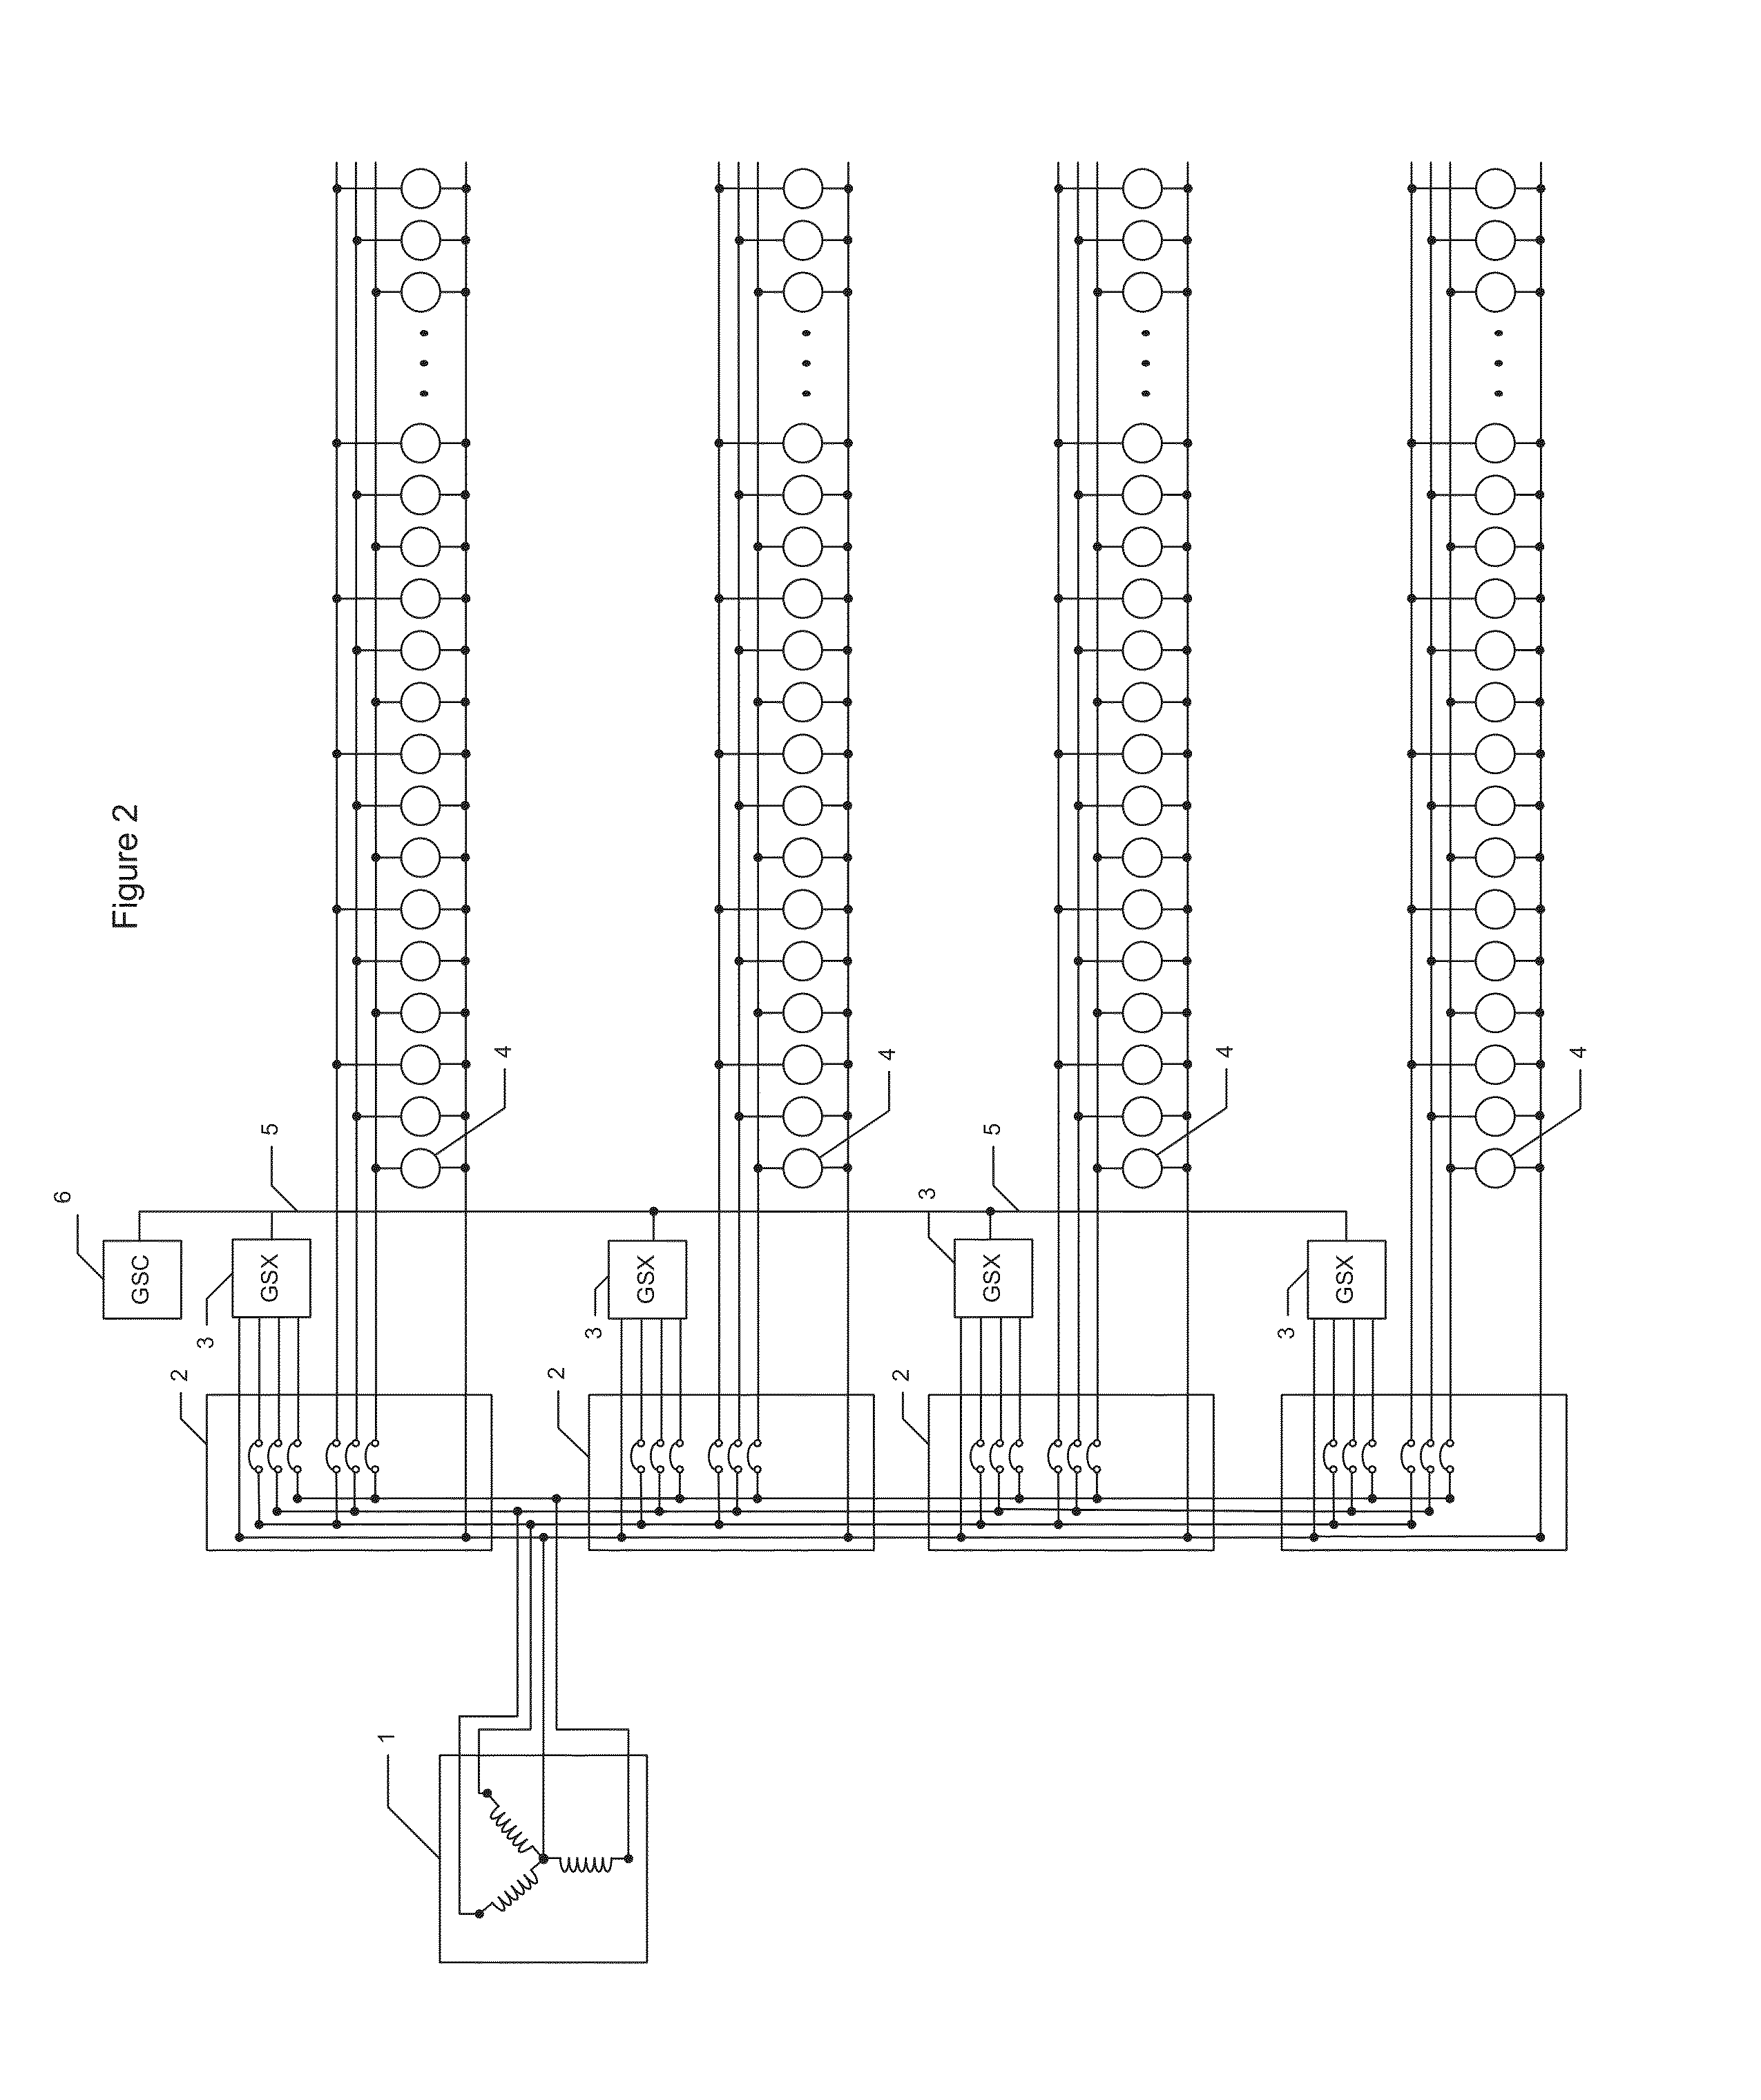 Poweline pulse position modulated three-phase transmitter apparatus and method